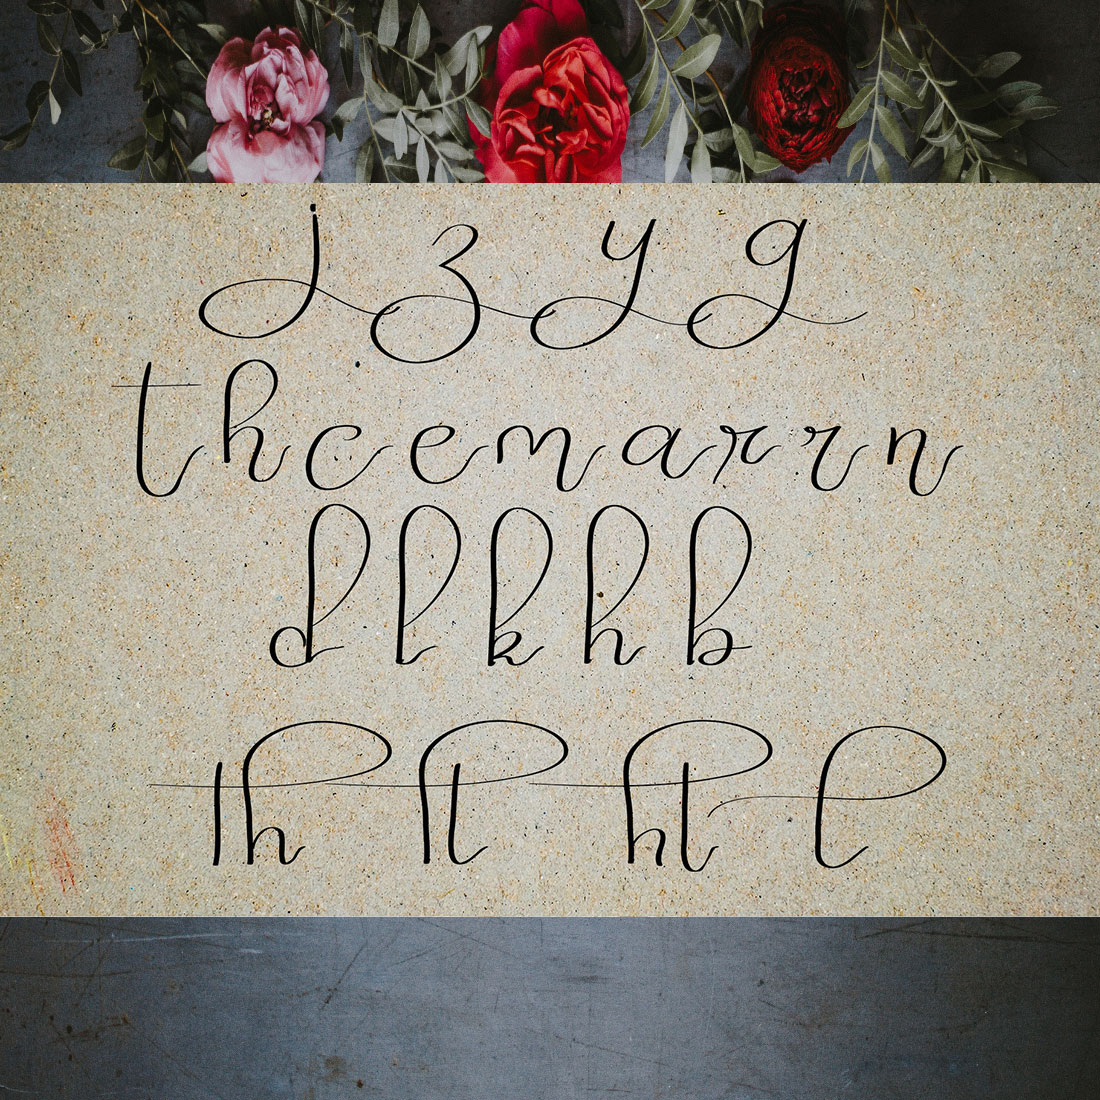 An image with letters showcasing the gorgeous Jenny typeface.